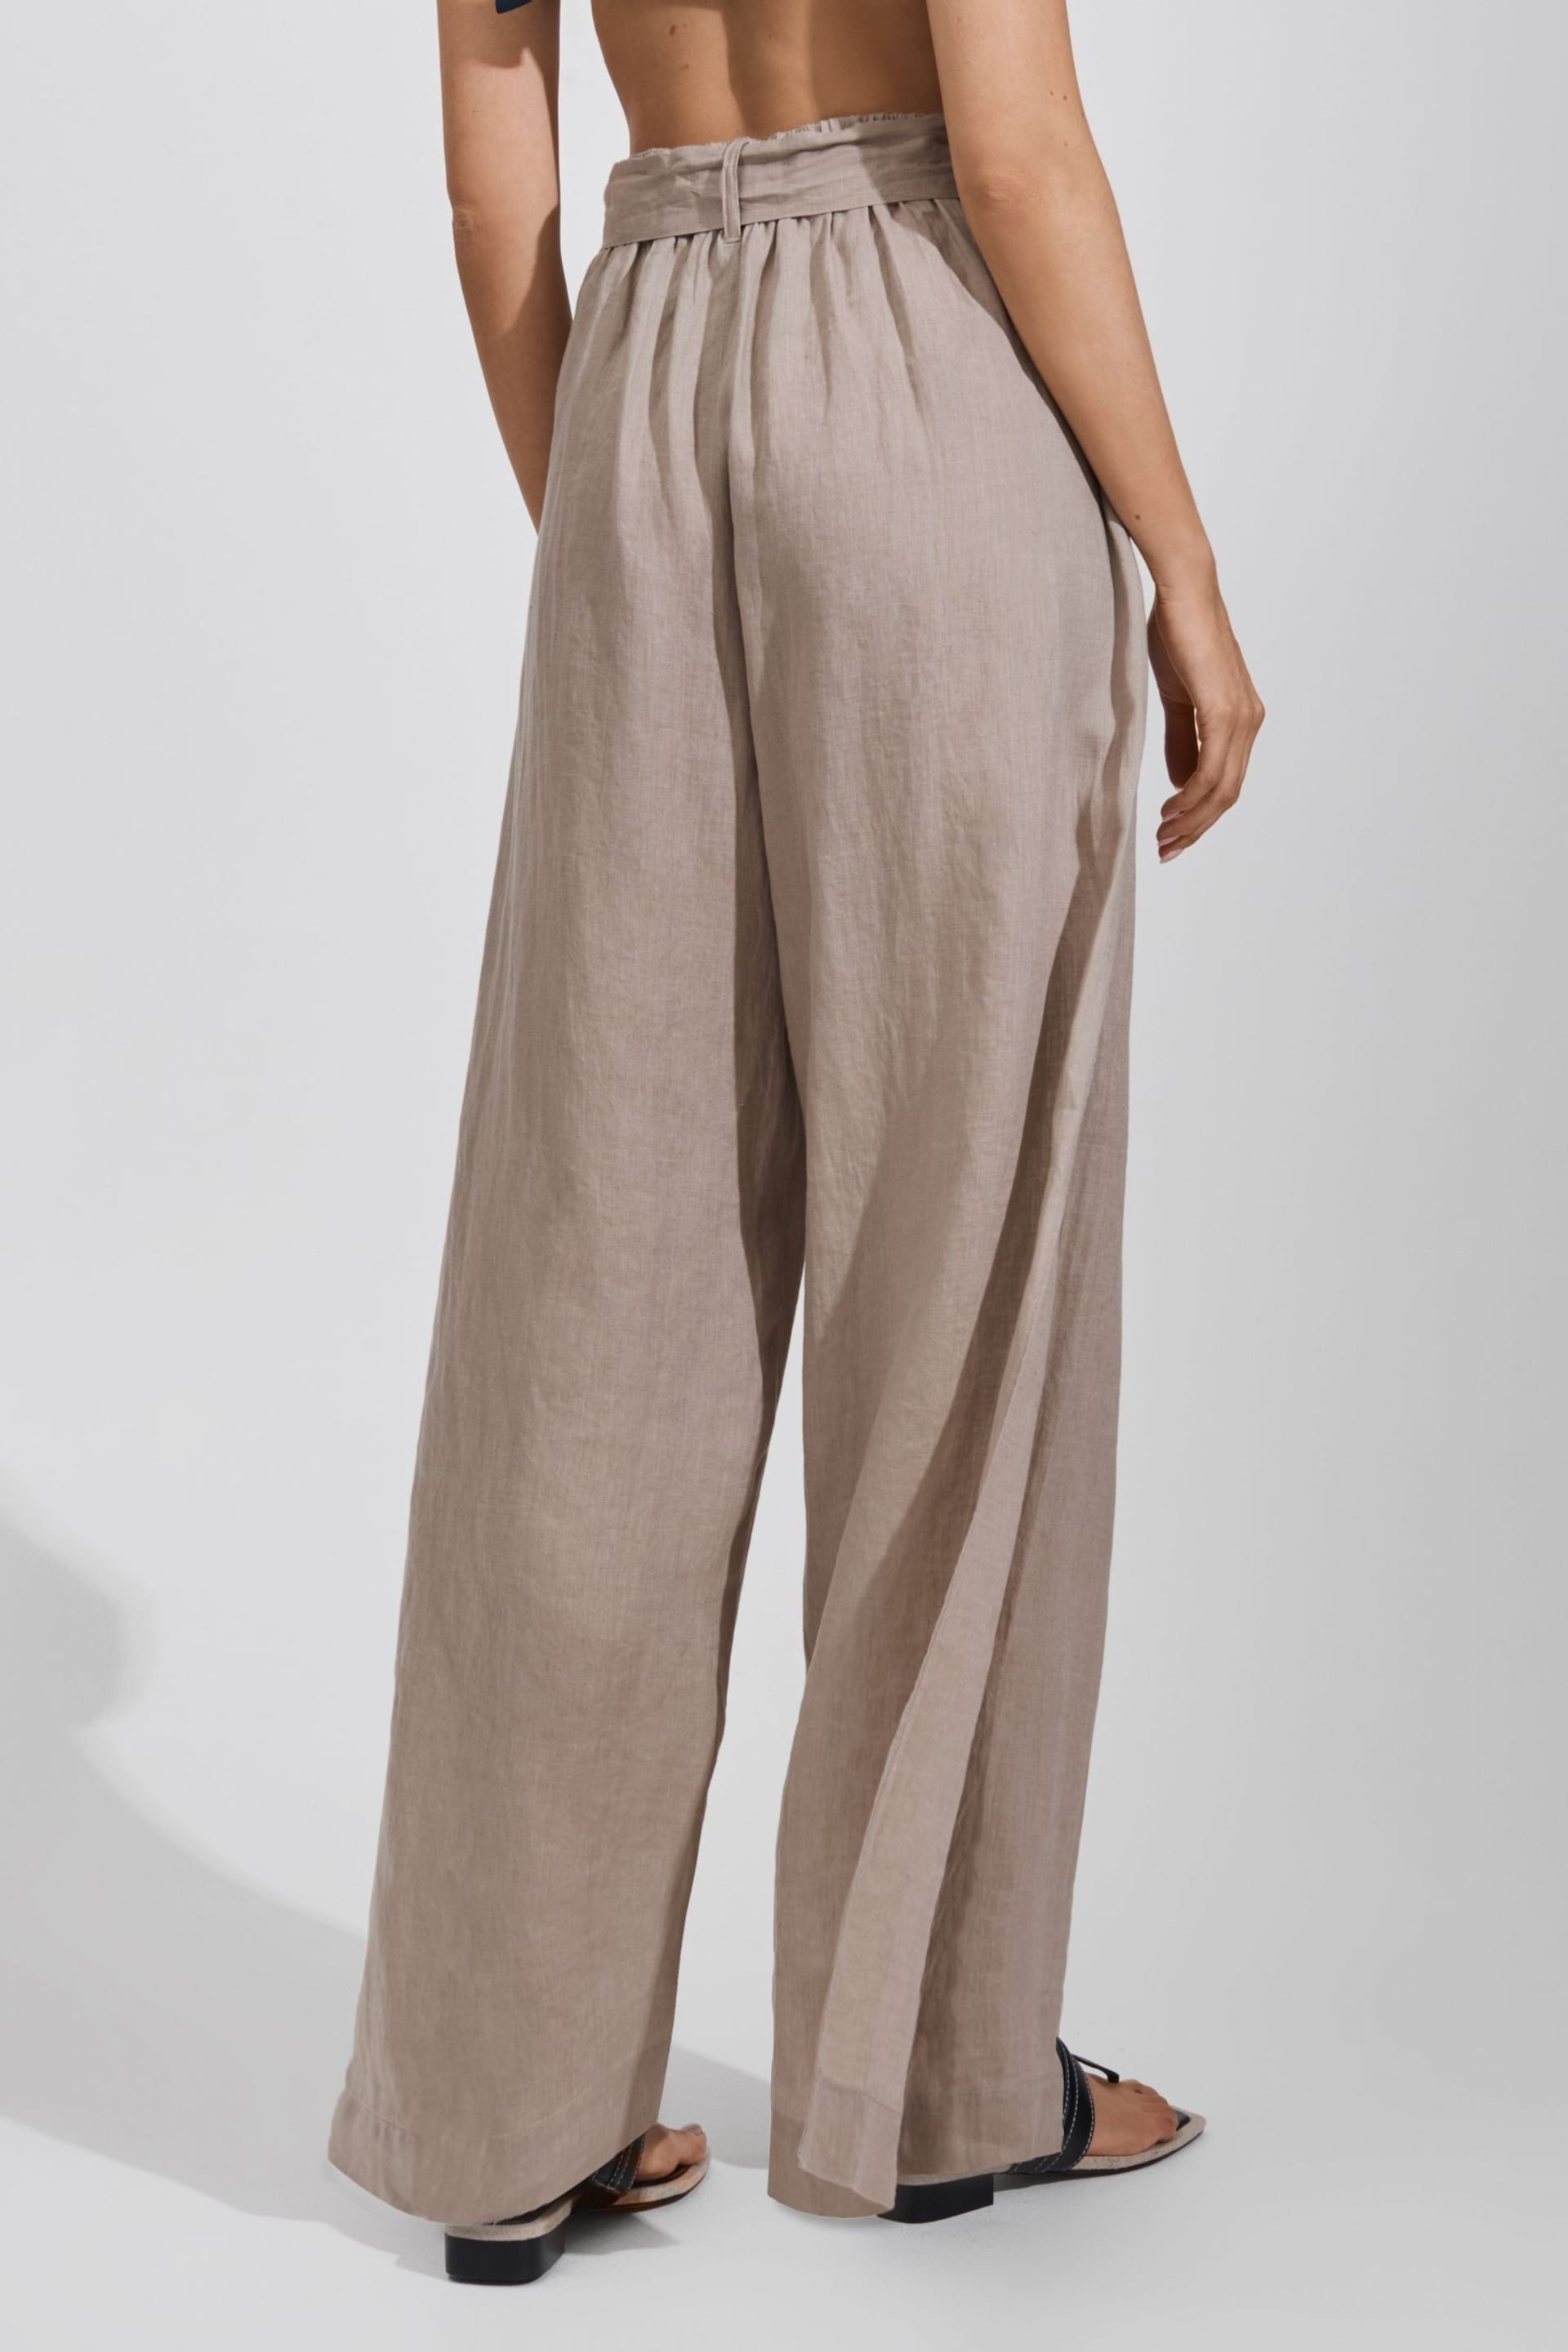 Reiss Taupe Harry Linen Side Split Trousers - Image 5 of 6